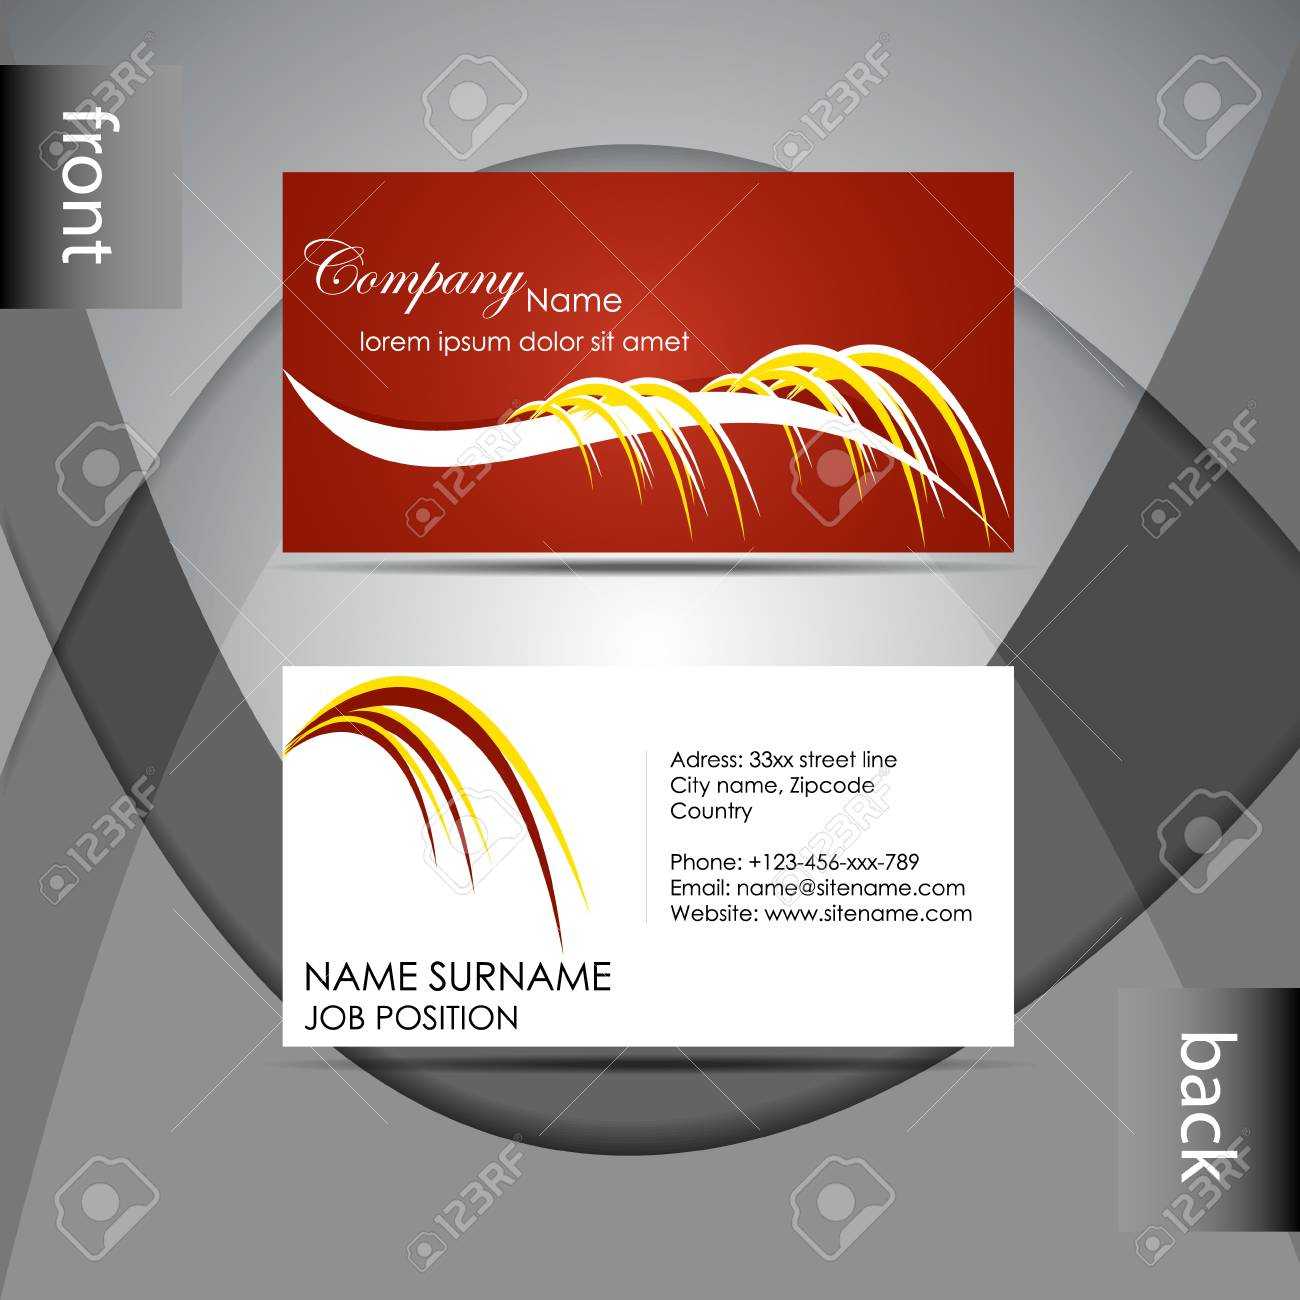 015 Template Ideas Professional Business Card Abstract Or In Professional Name Card Template